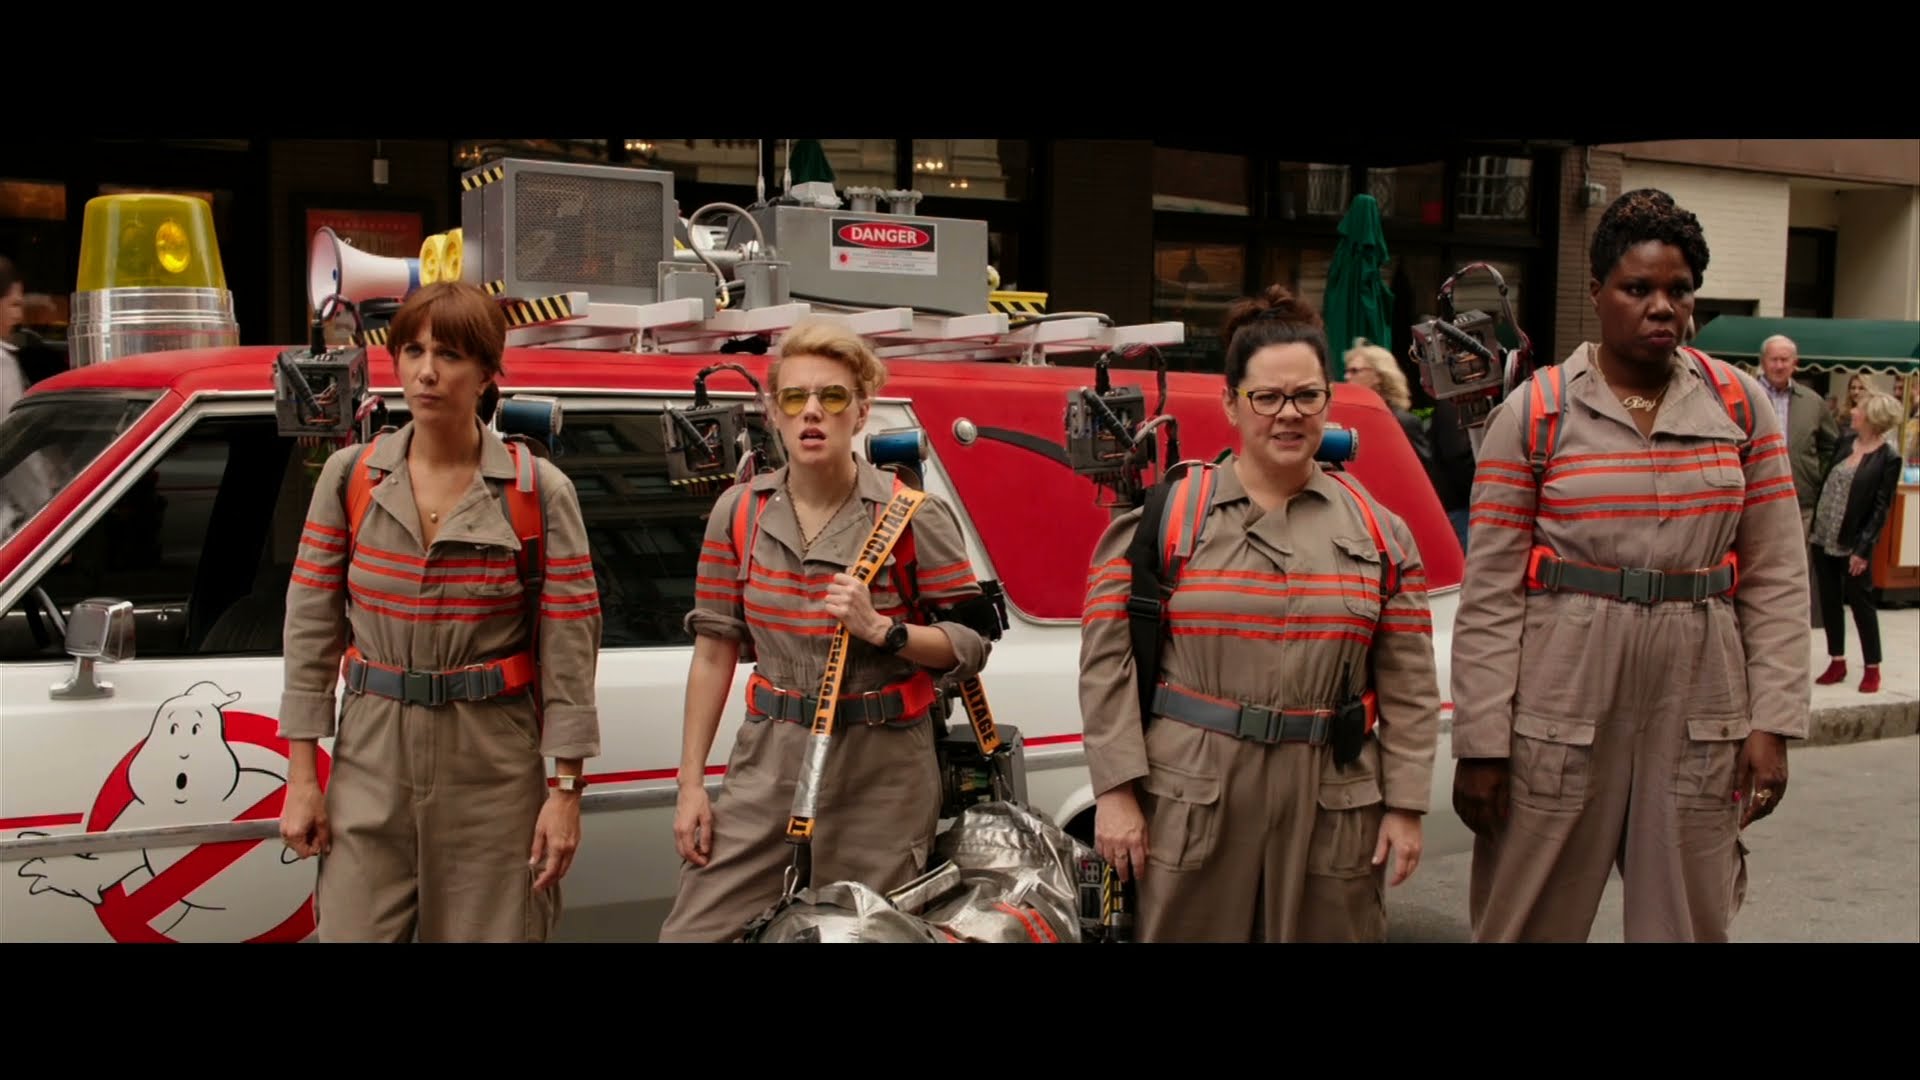 Behind the Scenes of the new Ghostbusters!